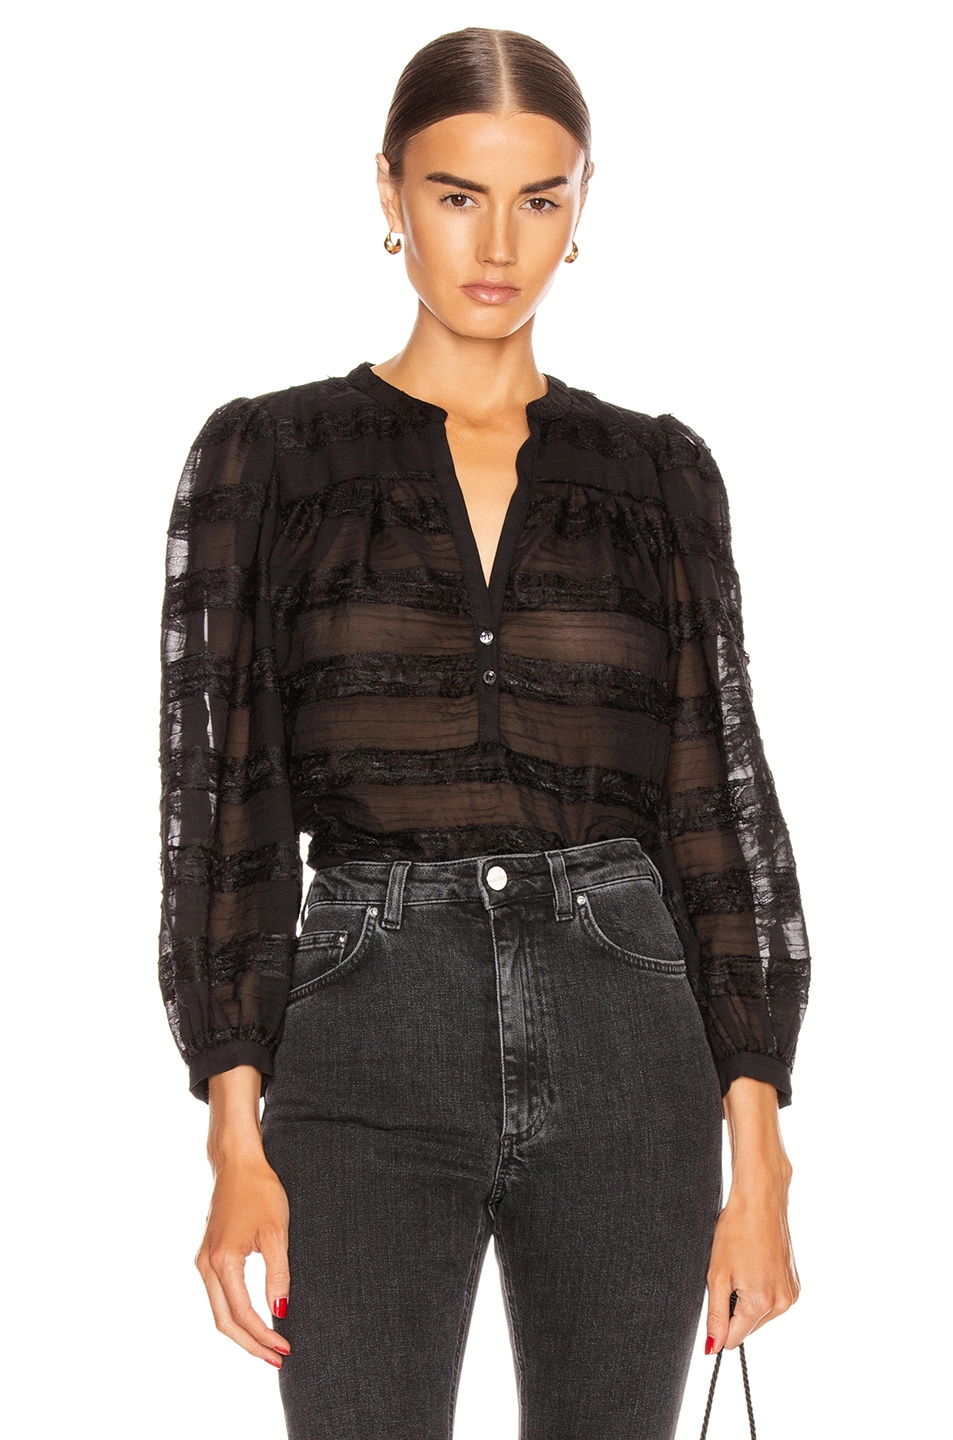 Image 1 of ICONS Objects of Devotion Modern Poet Top in Black Paneled Lace